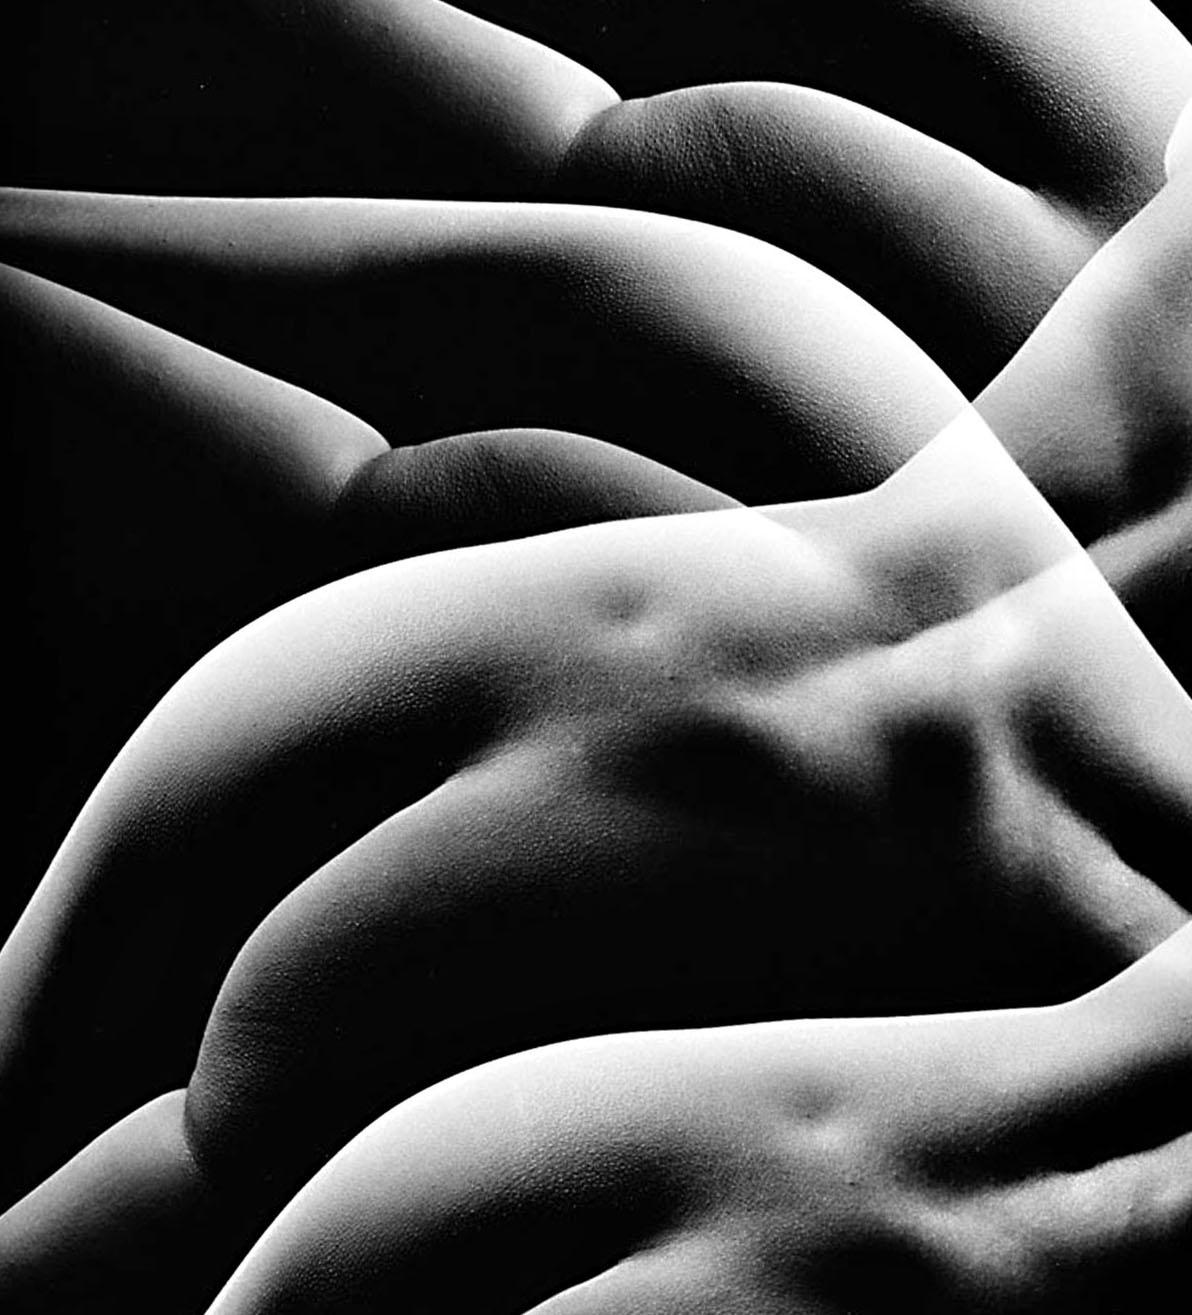 Female Nude from Numbered Nudes Series multiple exposure signed exhibition print - Photograph by Jack Mitchell